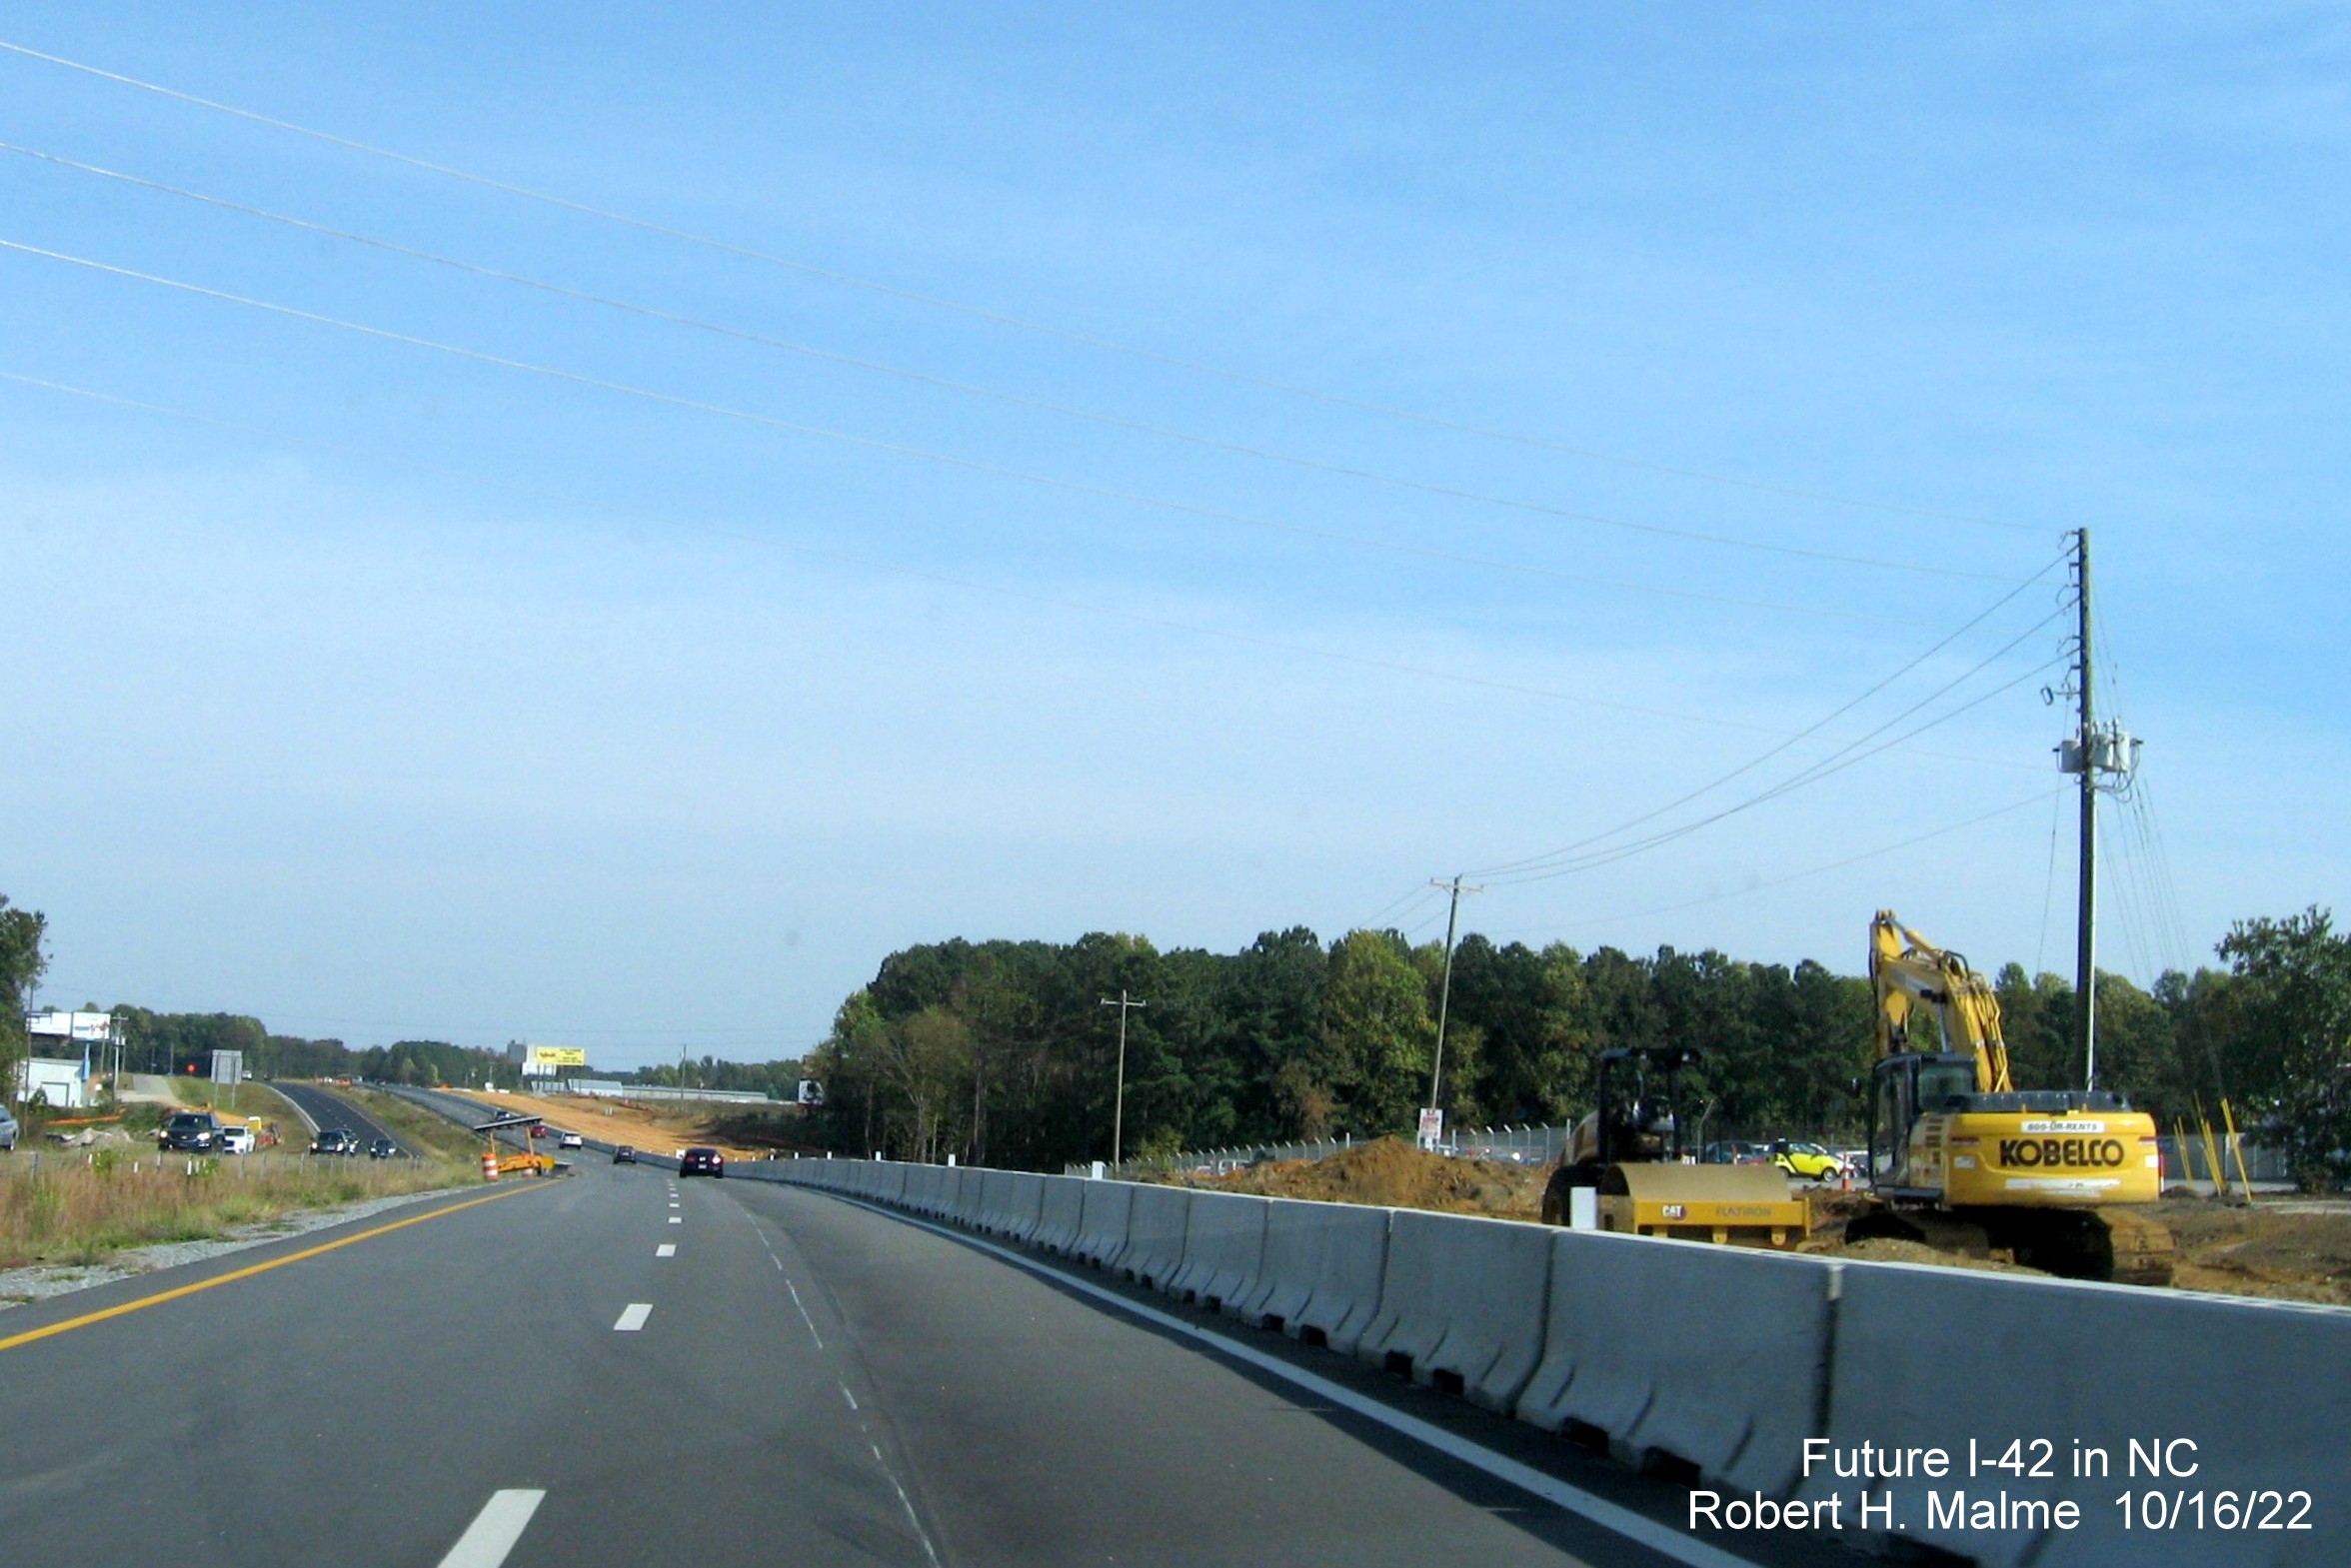 Image of graded new lanes for Future I-42 east on US 70 East in Clayton, October 2022